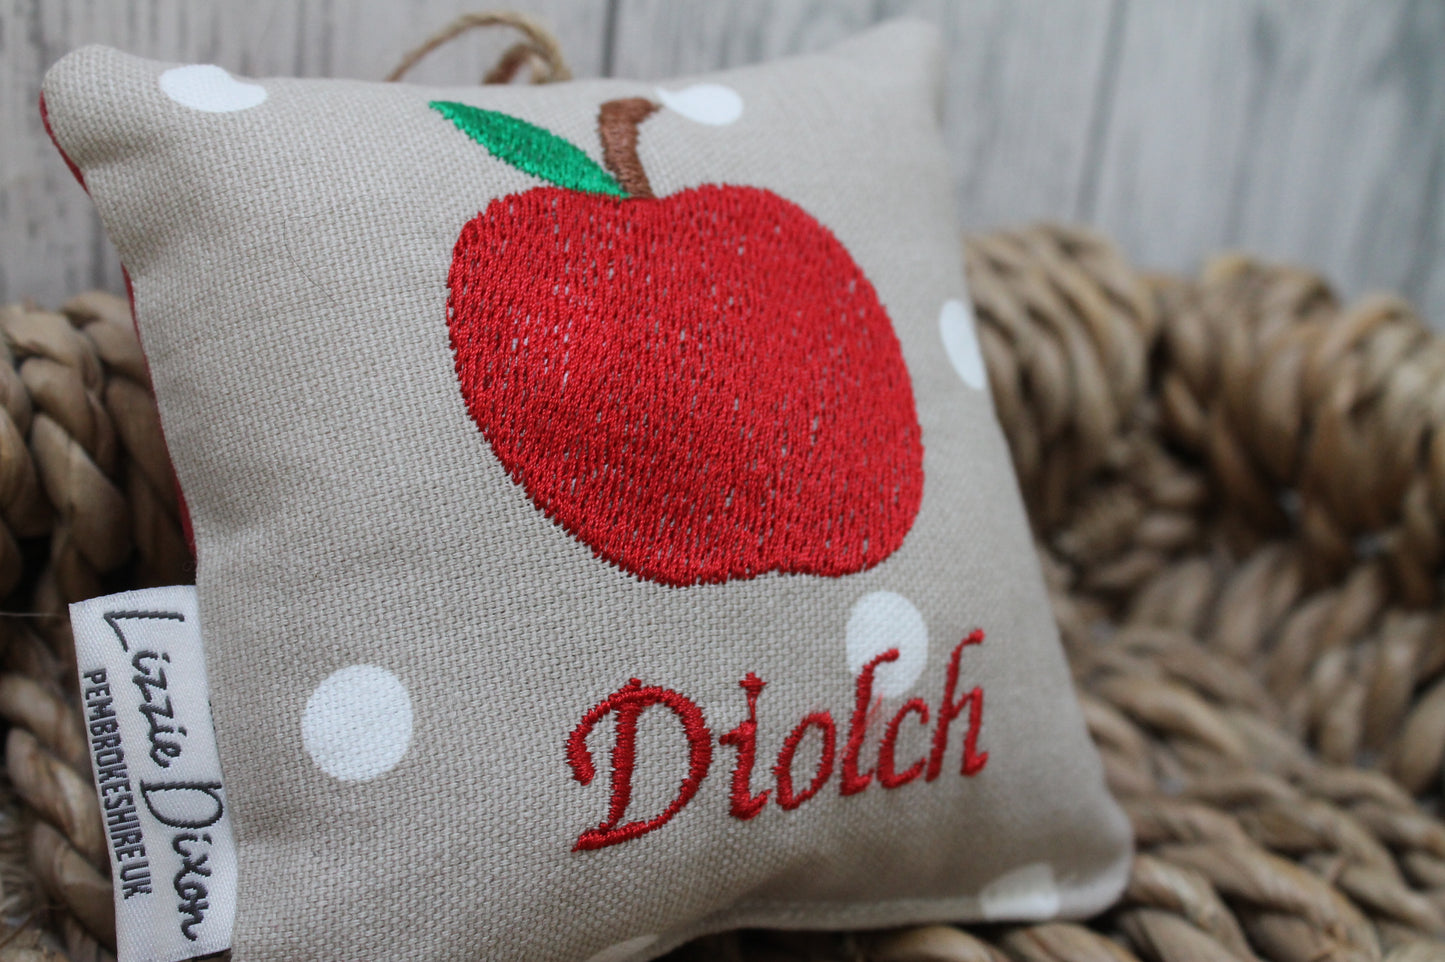 Apple Diolch/Thank you hanging decoration